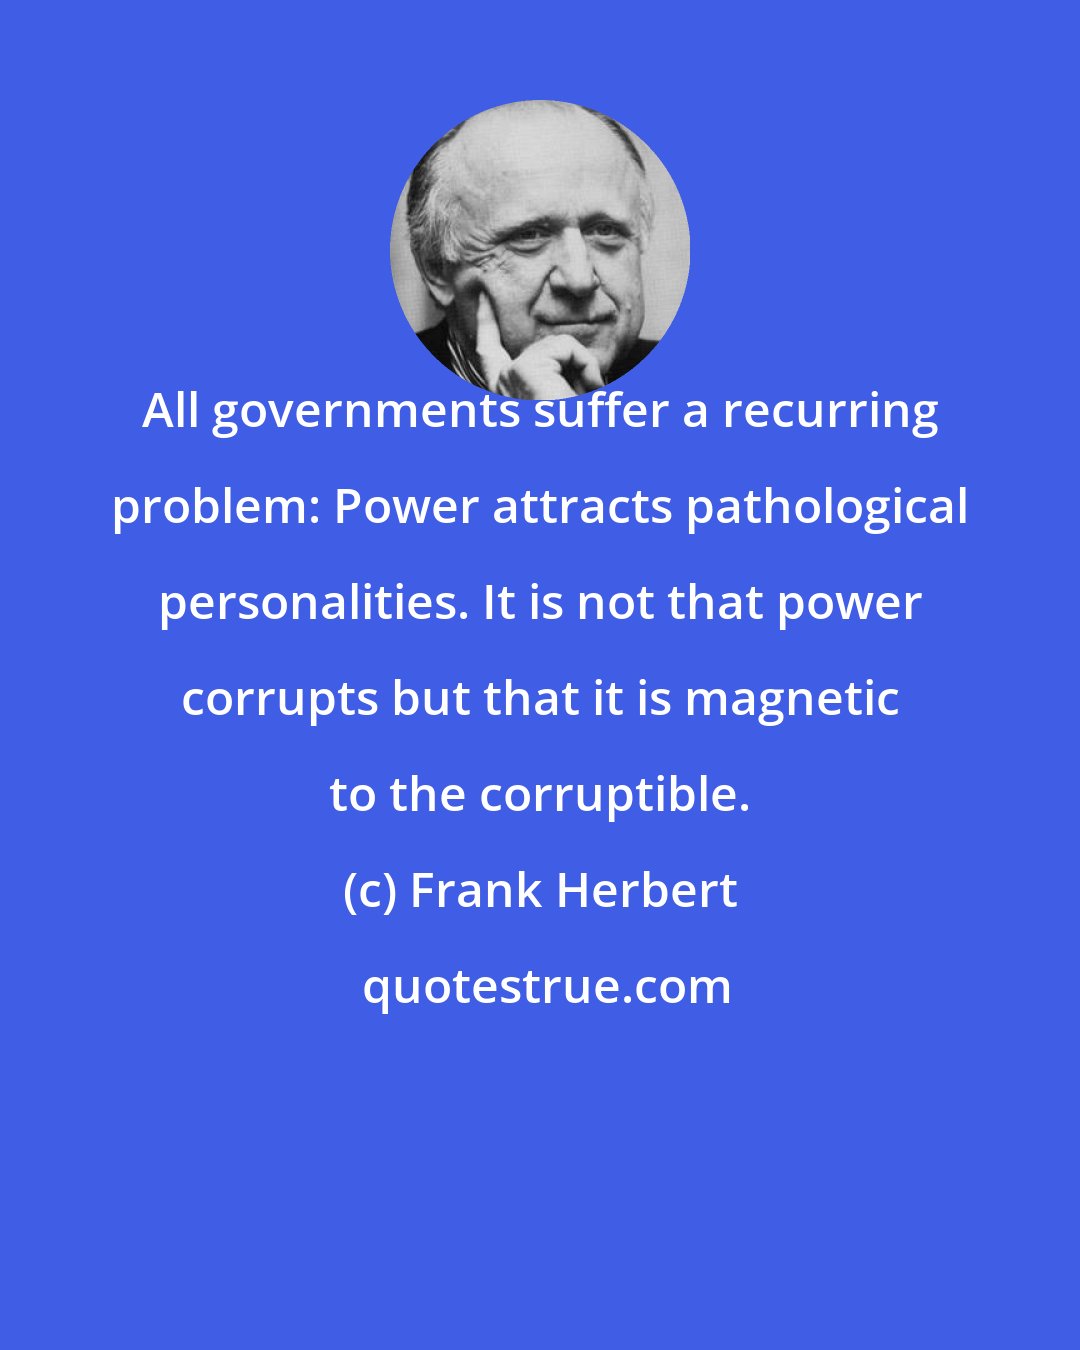 Frank Herbert: All governments suffer a recurring problem: Power attracts pathological personalities. It is not that power corrupts but that it is magnetic to the corruptible.